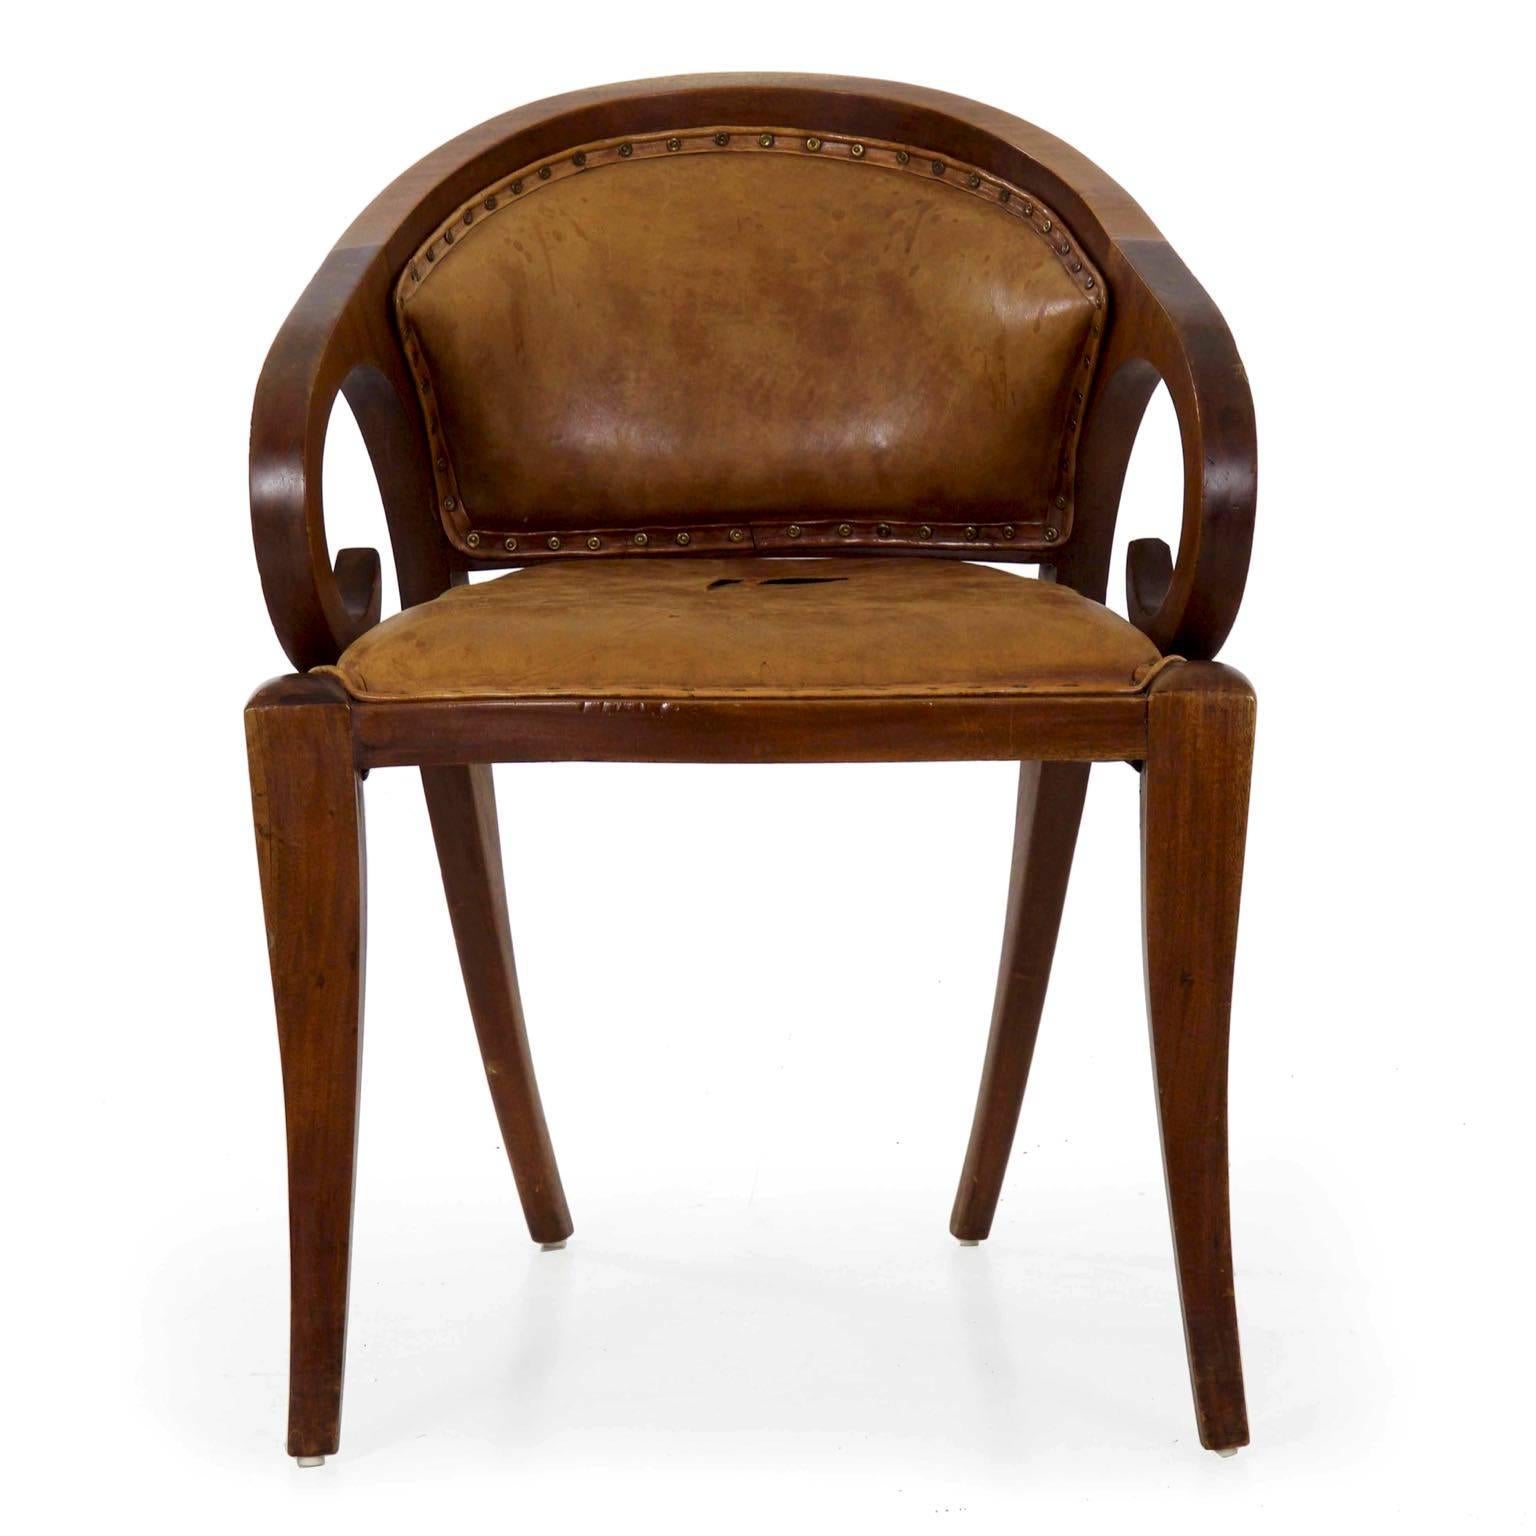 Austrian Vienna Secessionist Scrolled Mahogany and Leather Armchair, circa 1910